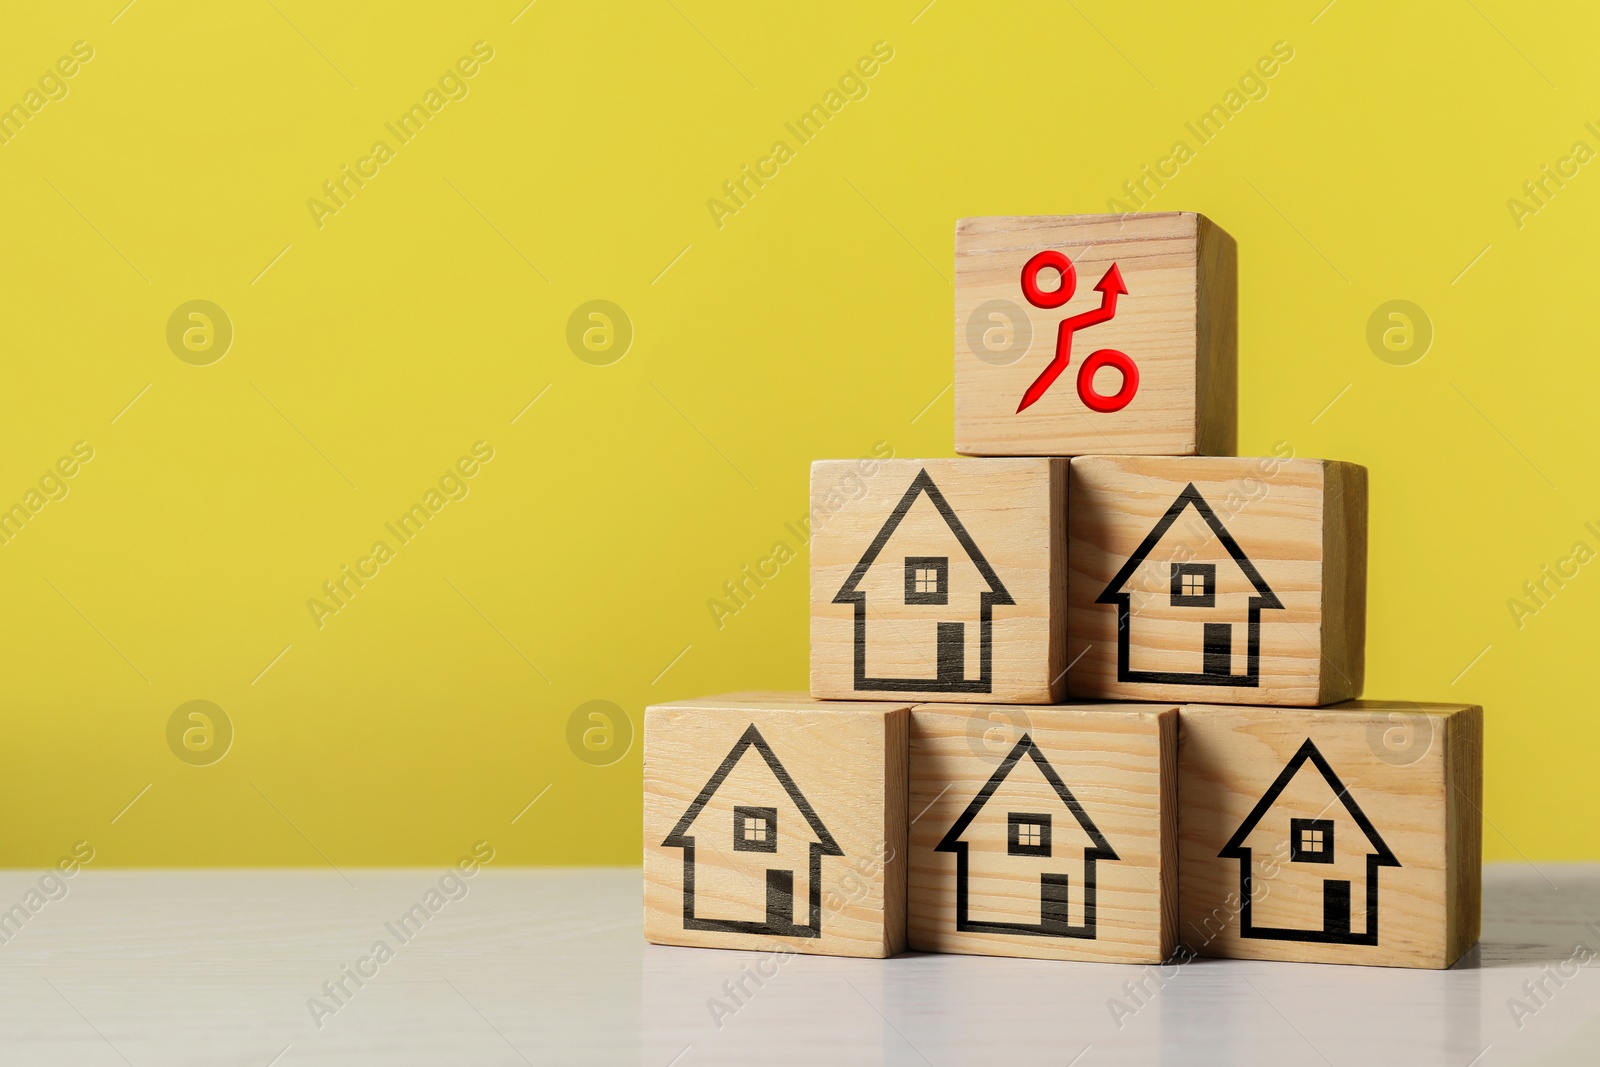 Image of Mortgage rate rising illustrated by percent sign with upward arrow. Pyramid of wooden cubes with house icons on table, space for text